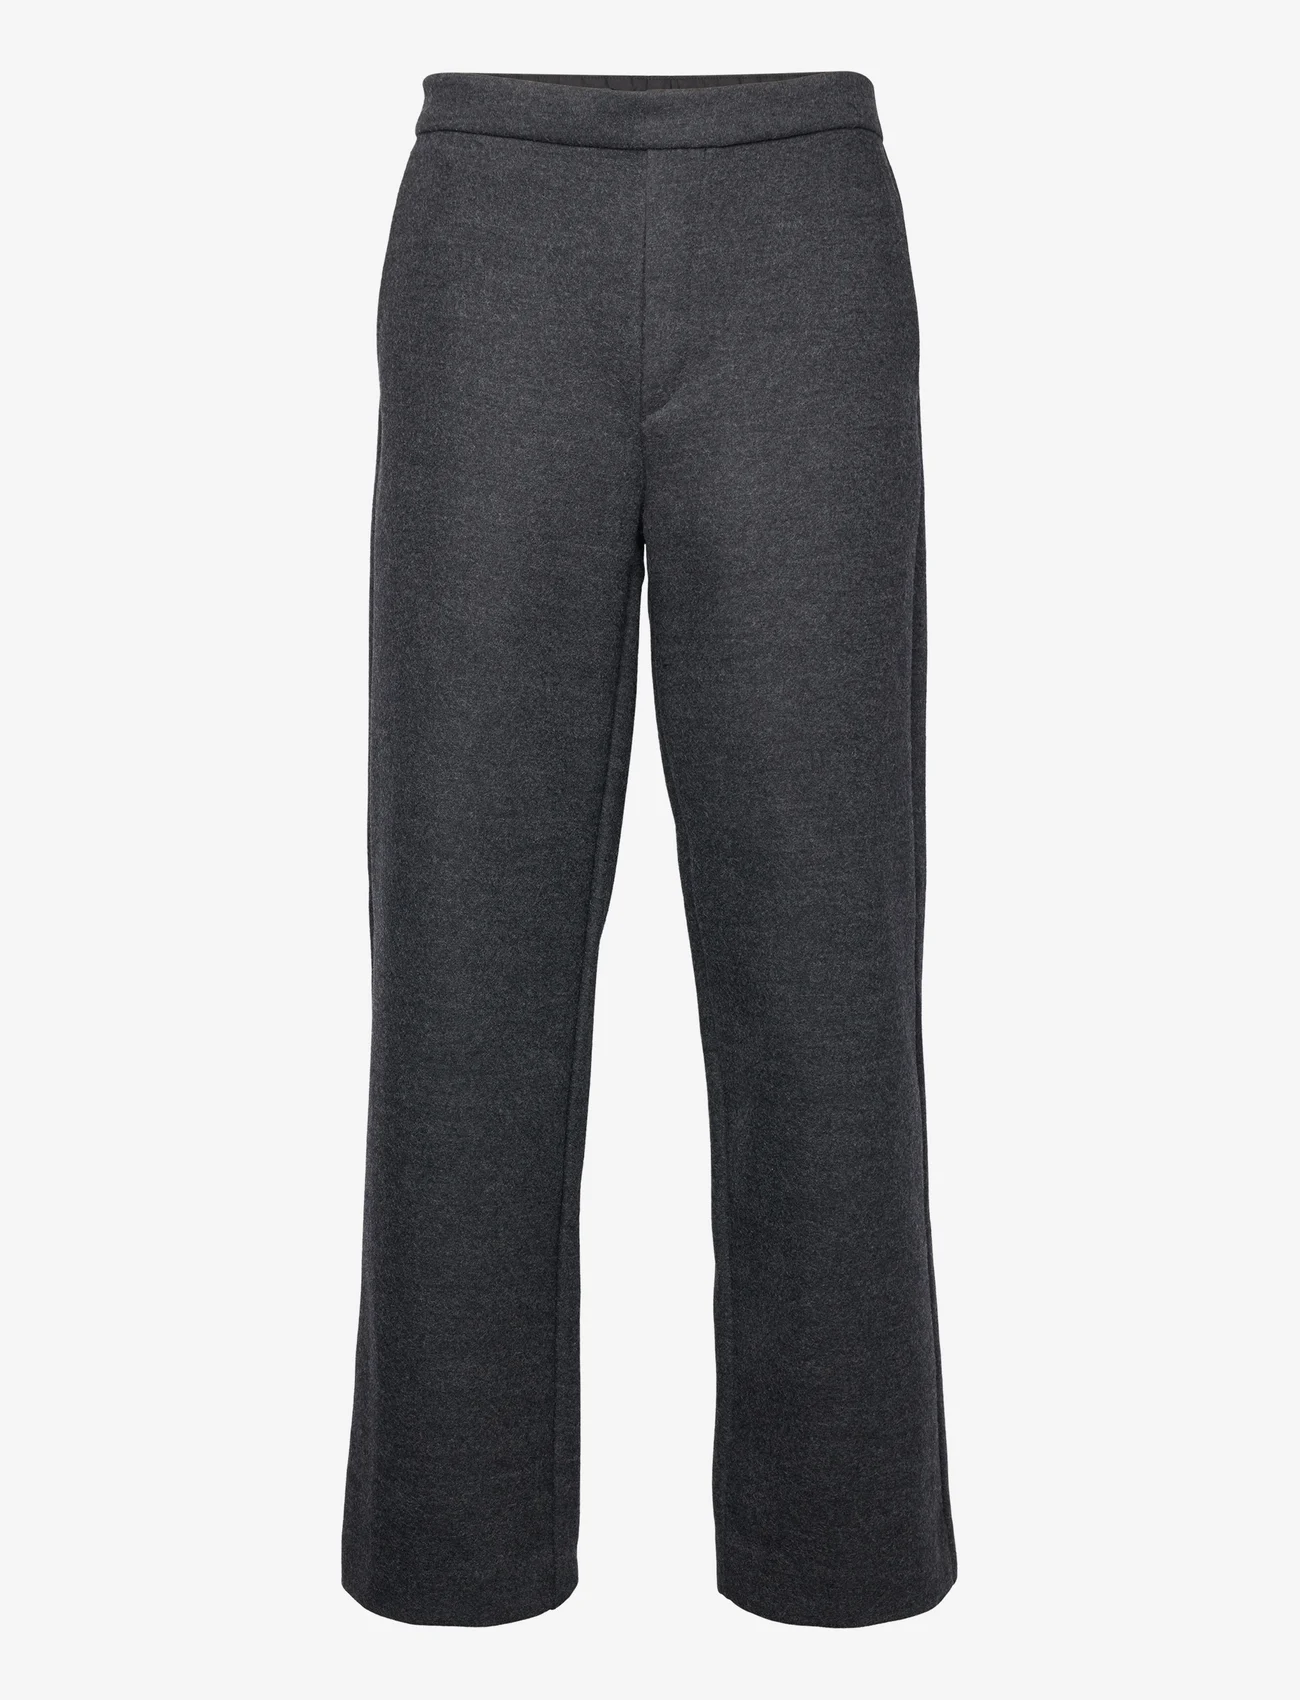 Urban Pioneers - Socrates Pants - chinot - charcoal - 0